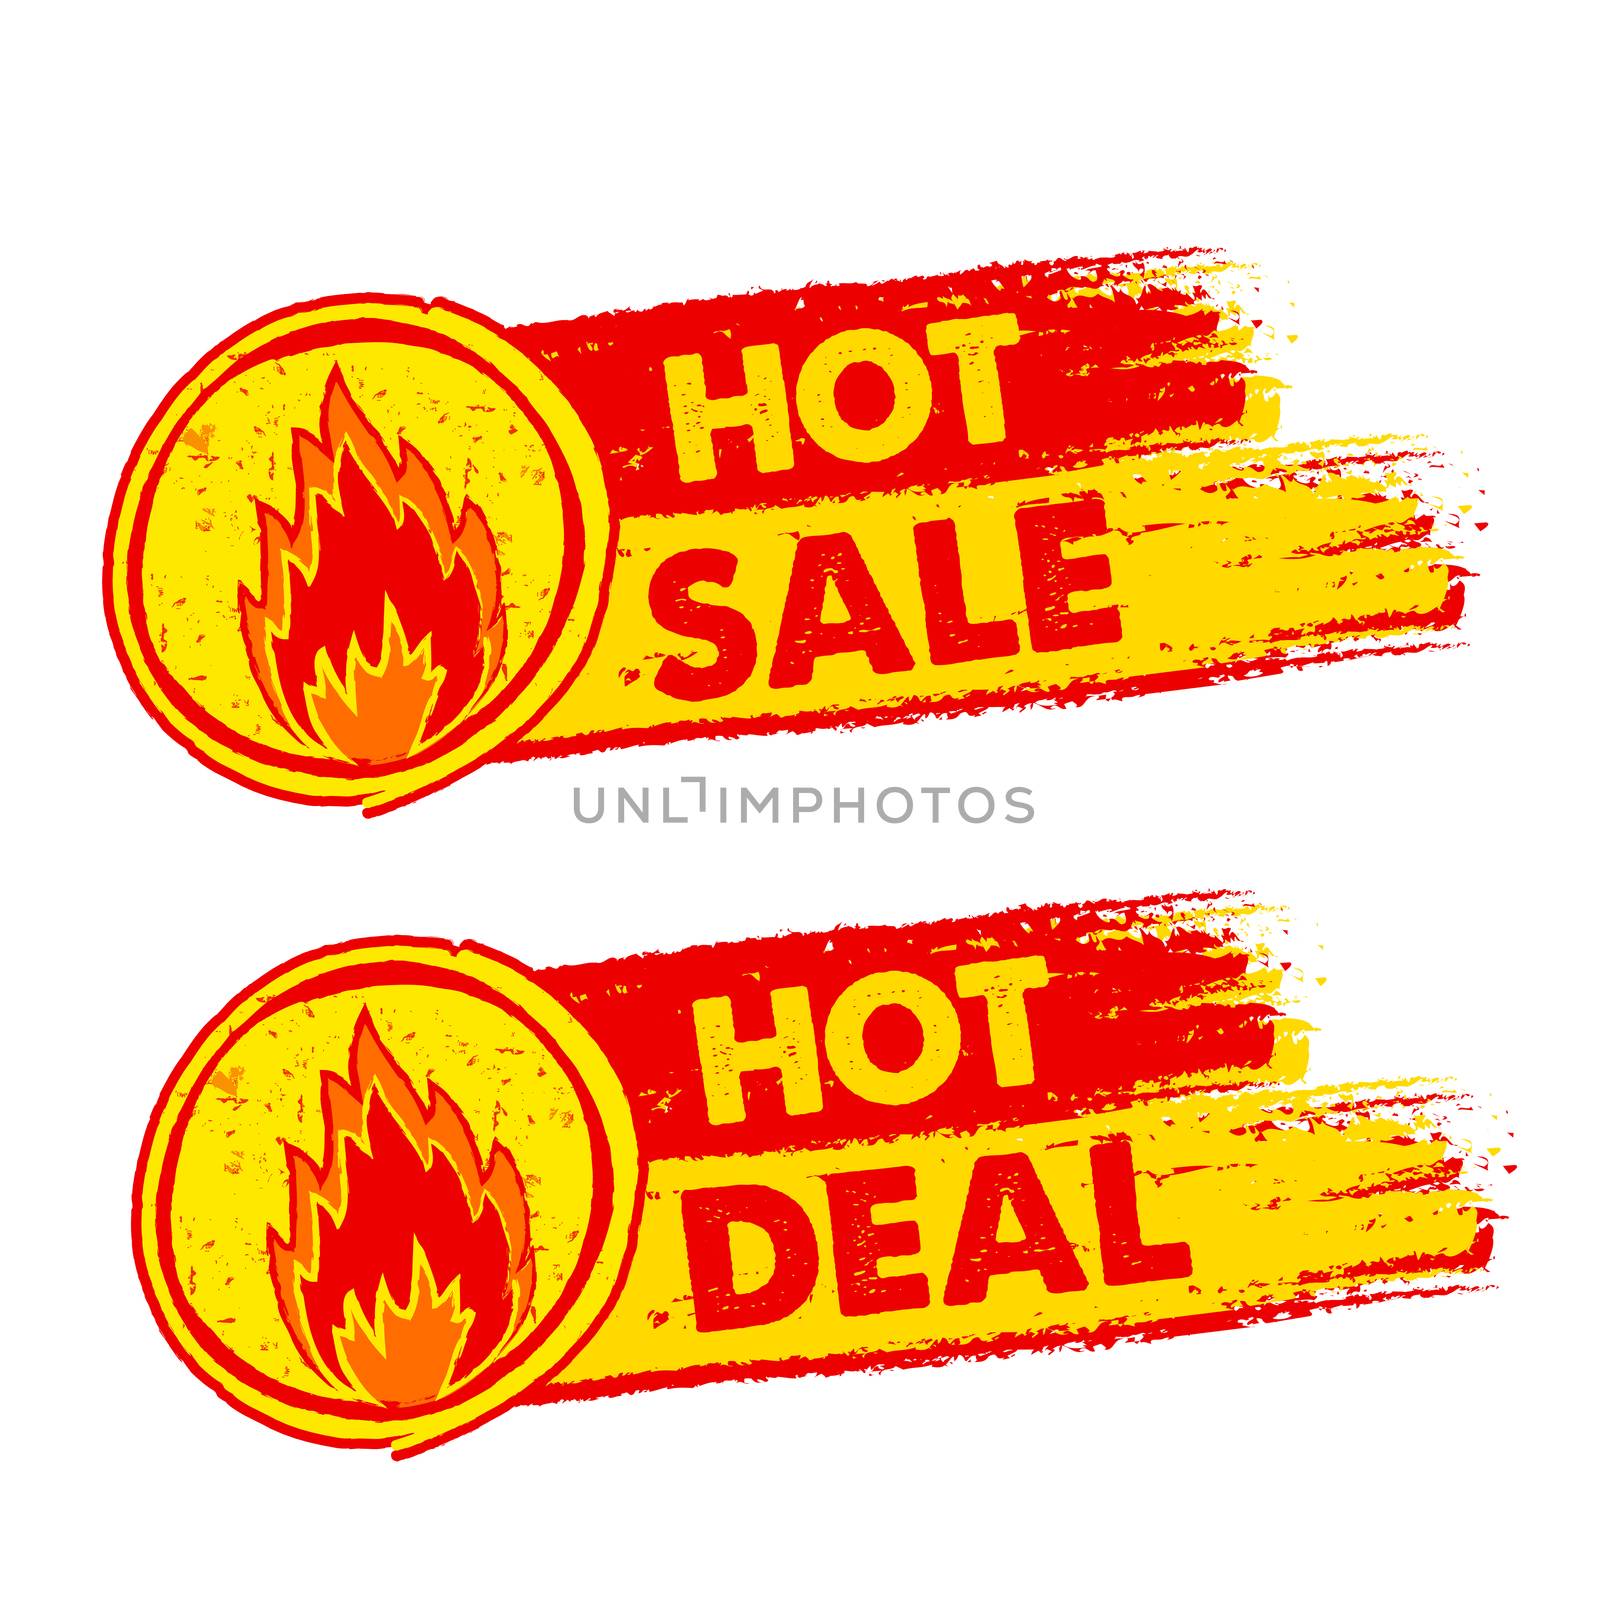 hot sale and deal on fire banners - text in yellow and red drawn labels with flames signs, business shopping concept